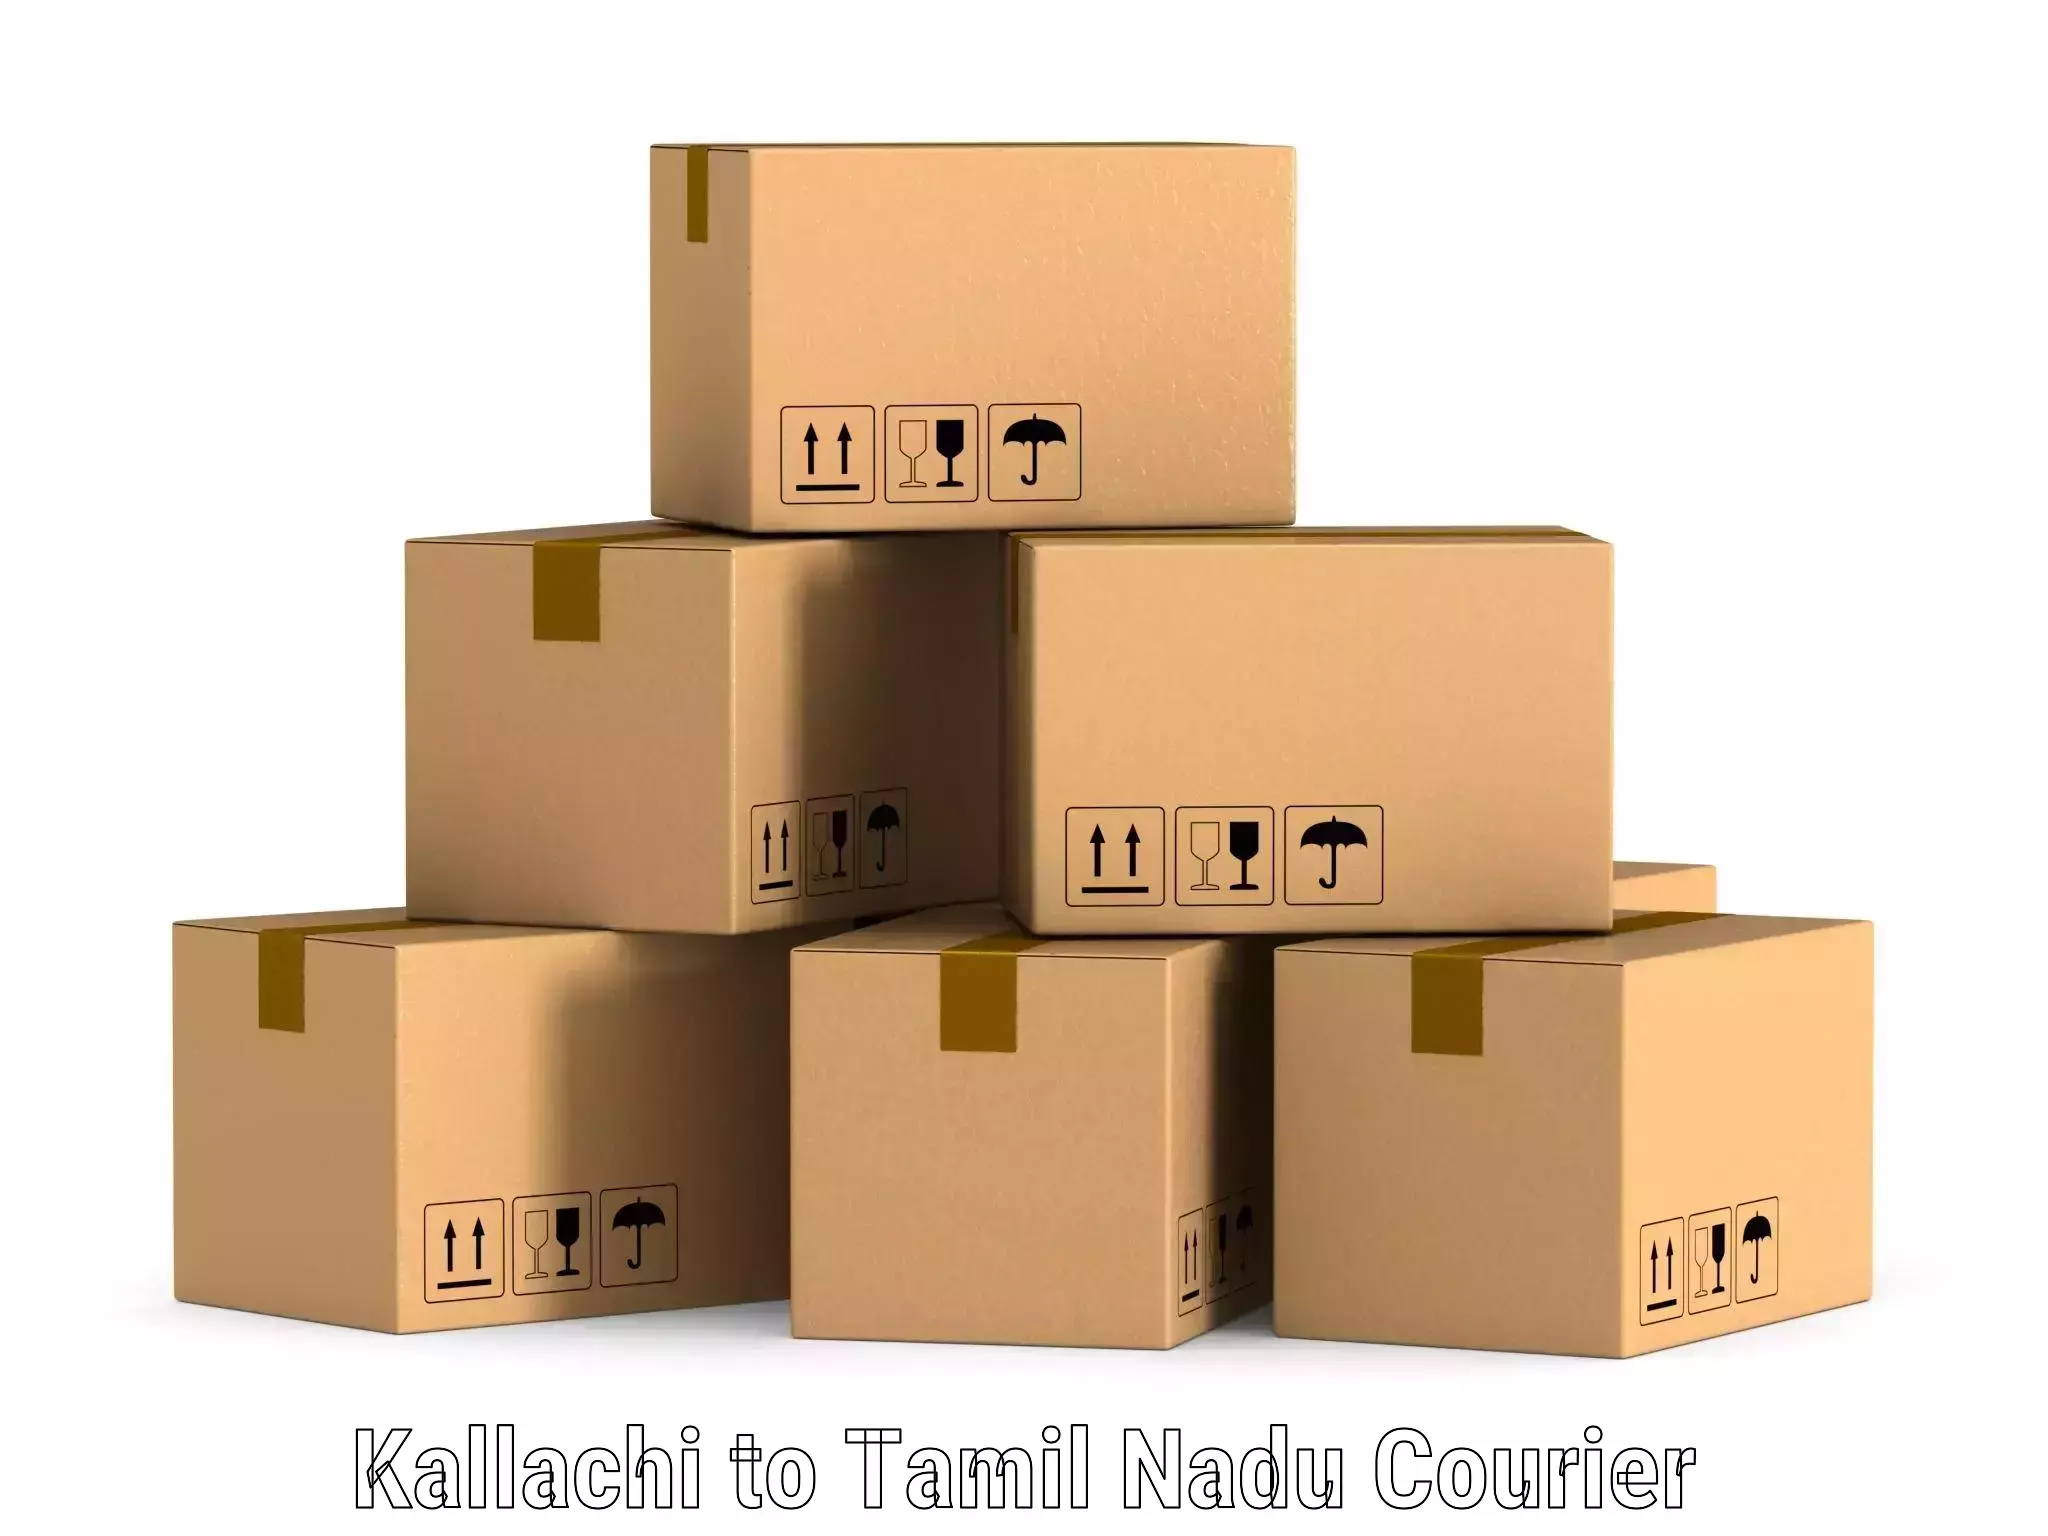 High-capacity shipping options in Kallachi to Natham